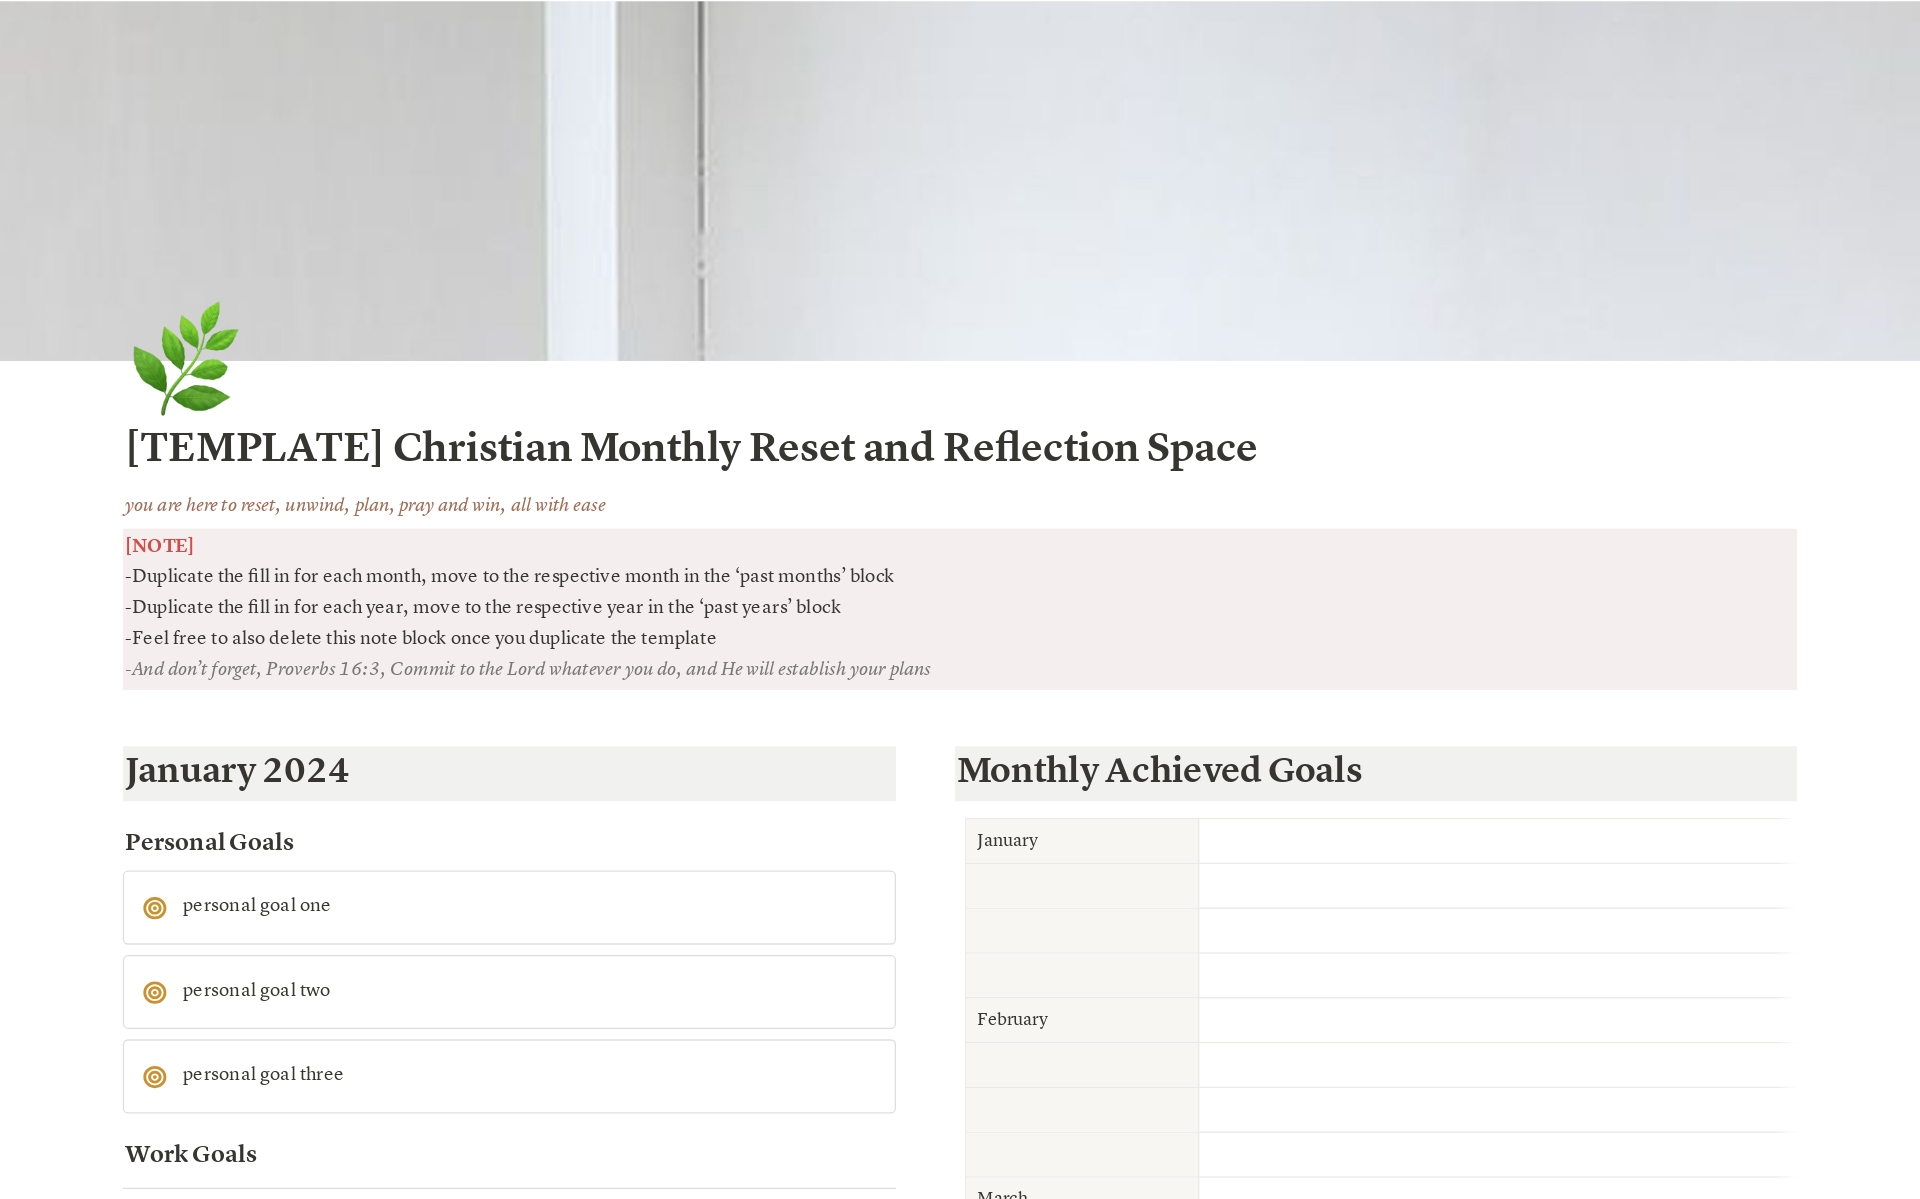 Christian Monthly Reset & Reflection Spaceのテンプレートのプレビュー